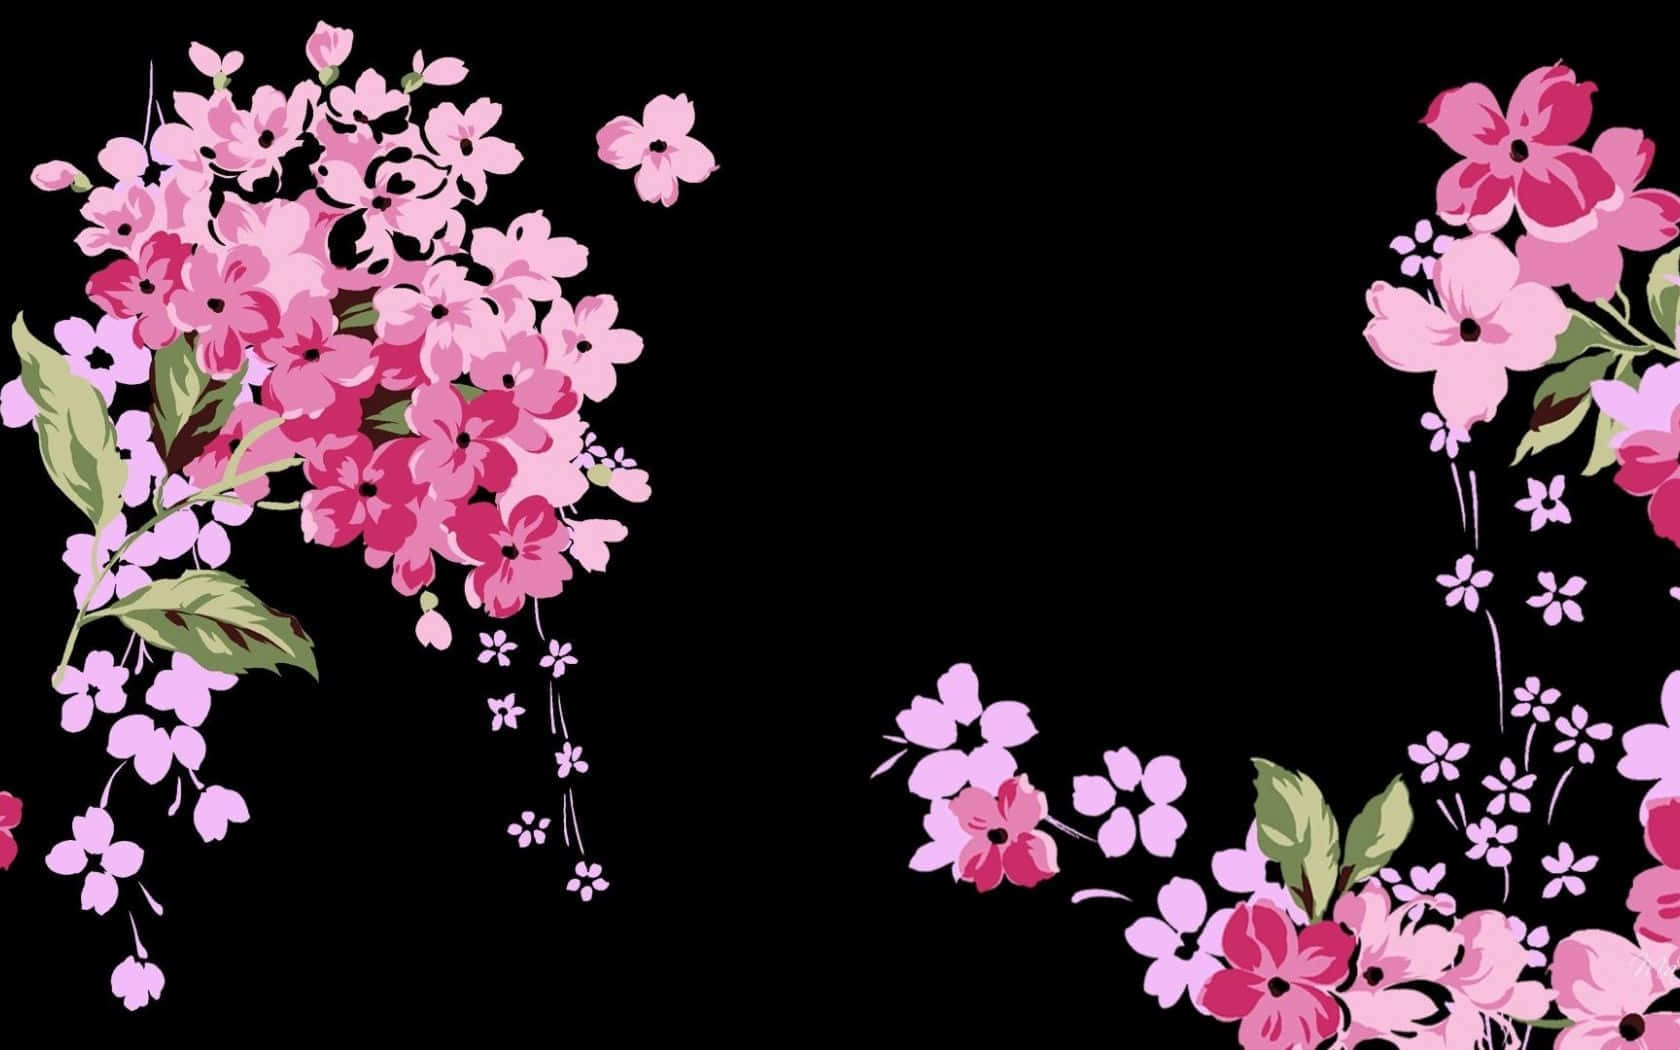 A Black Background With Pink Flowers On It Wallpaper